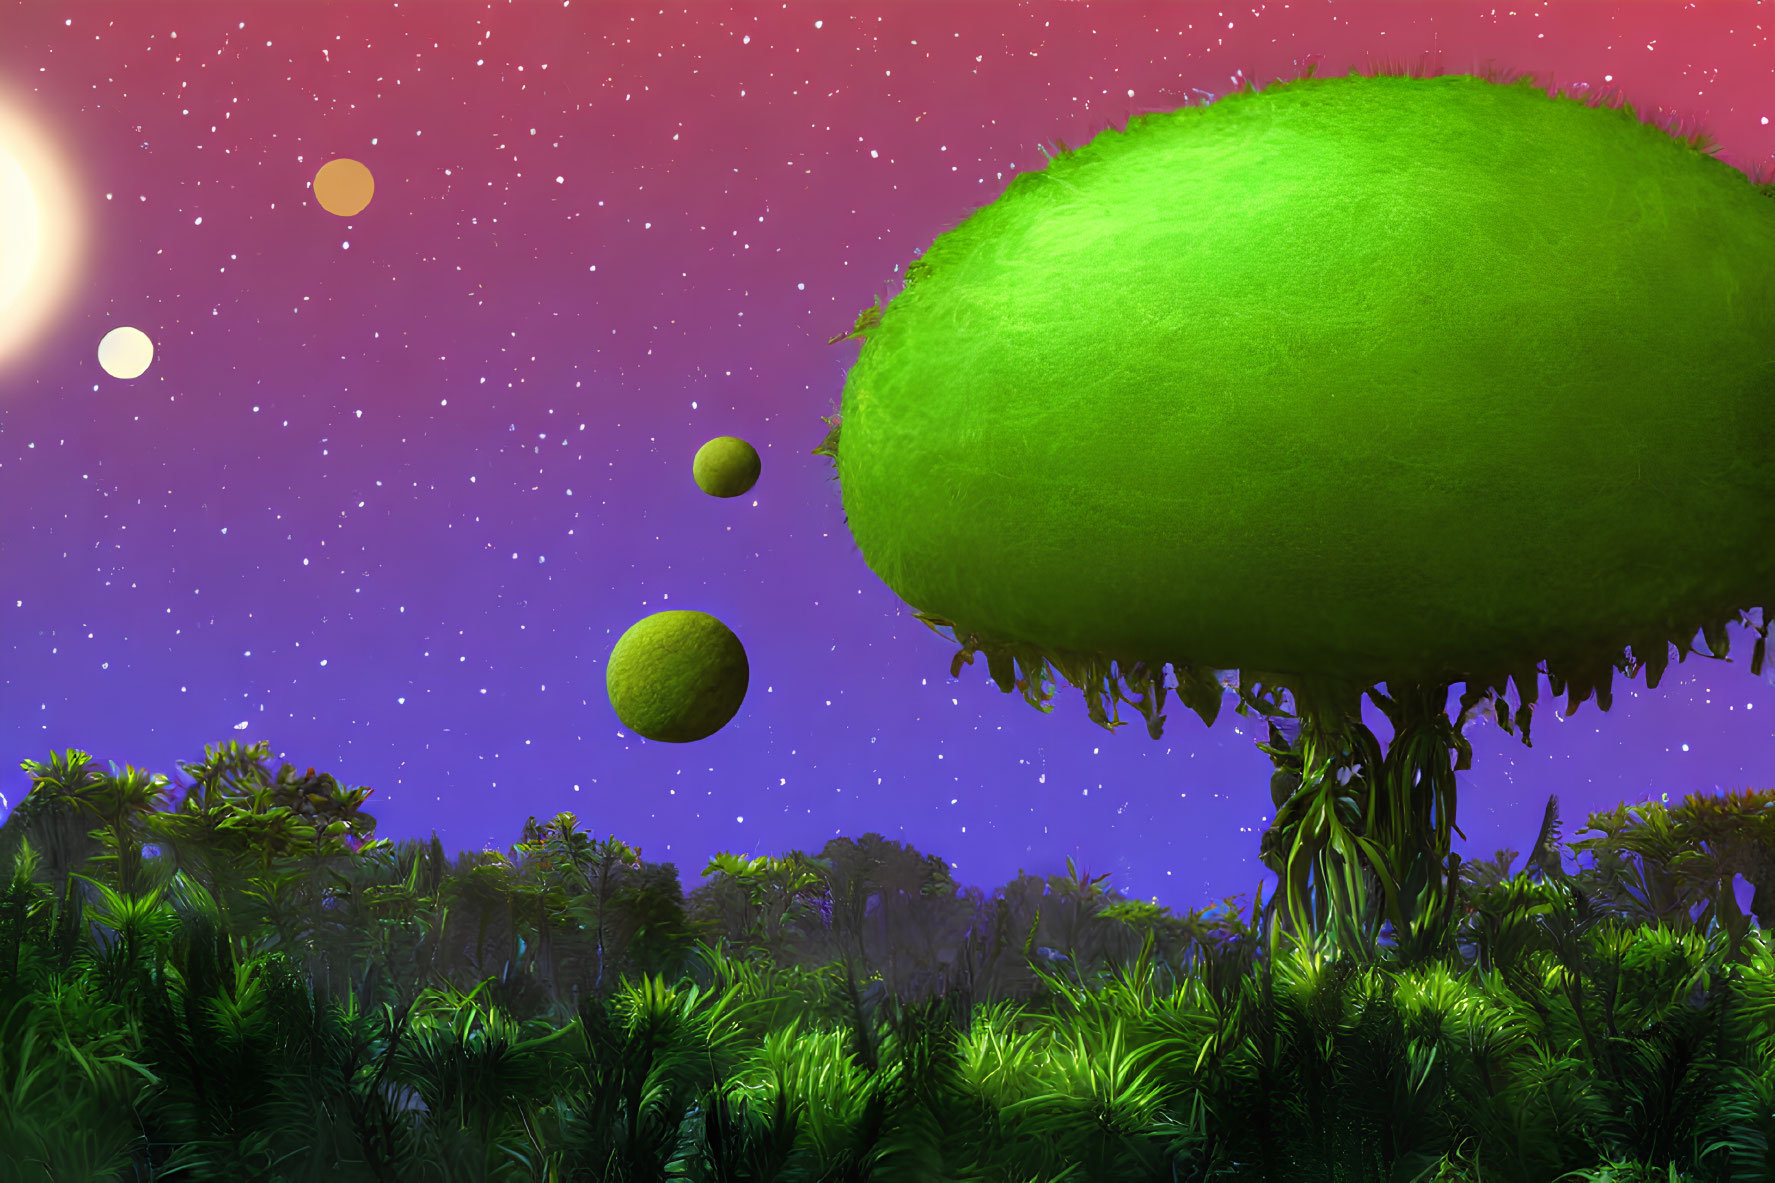 Colorful Alien Landscape with Floating Island and Cosmic Sky